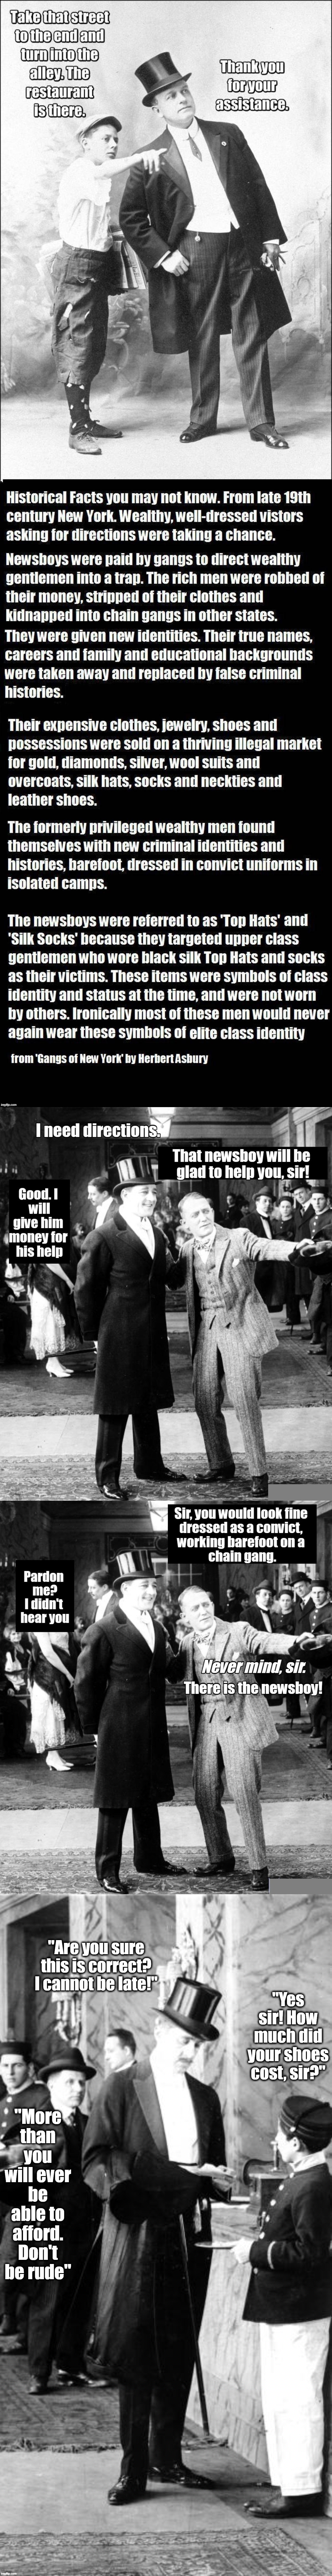 The Perils of Asking for Directions. Example from History | image tagged in dark humor | made w/ Imgflip meme maker